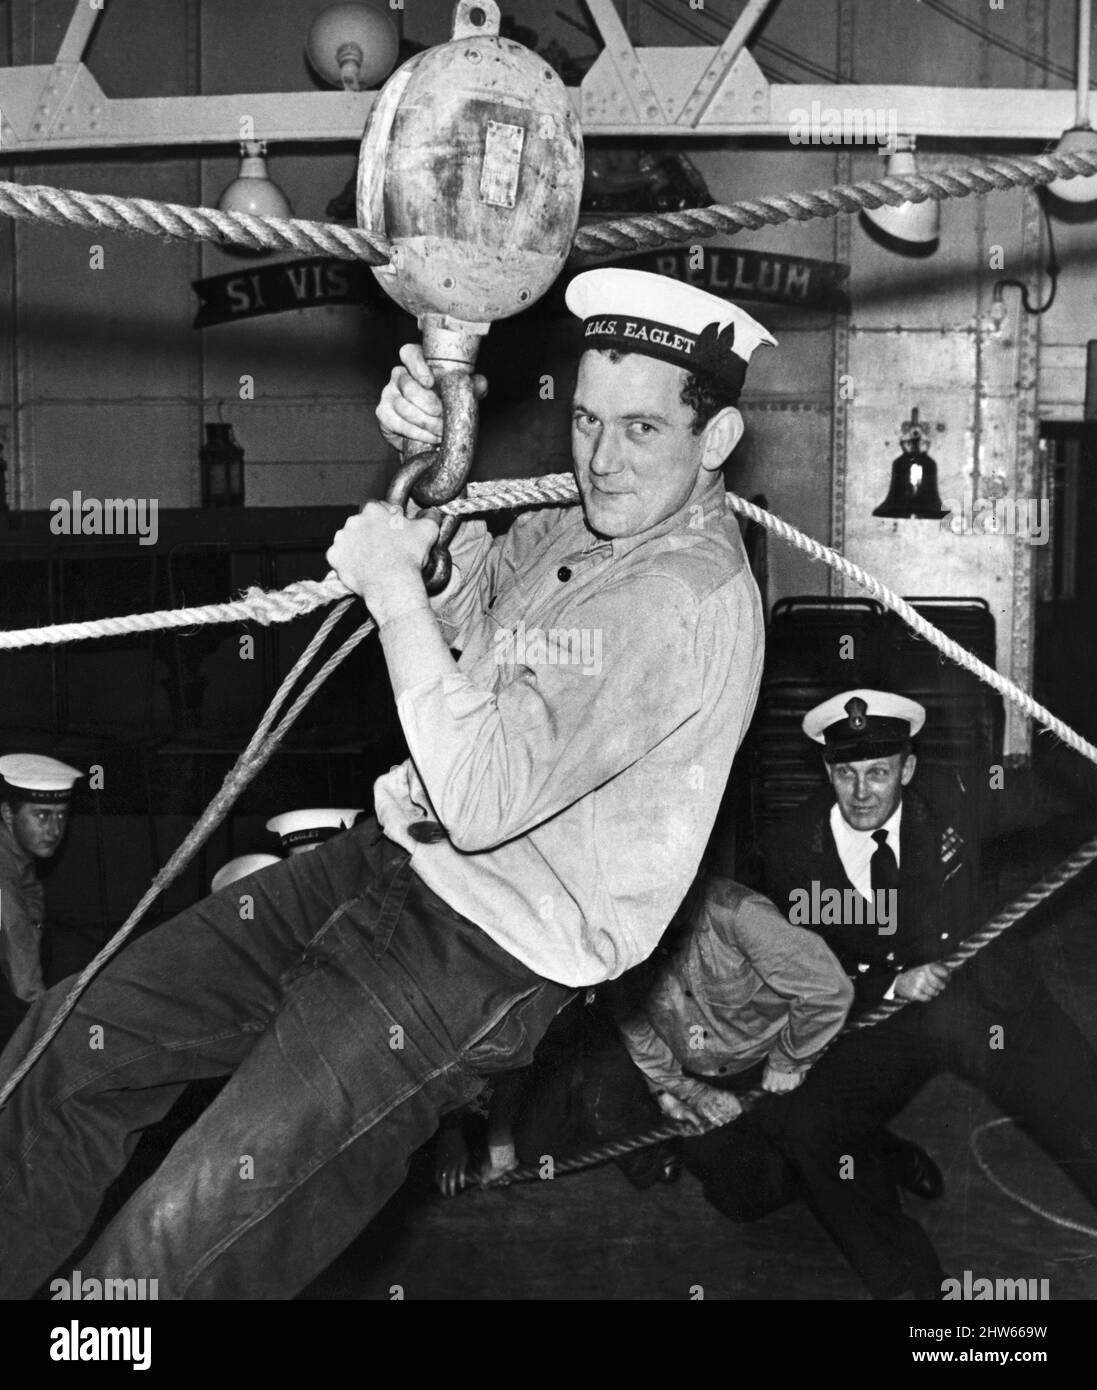 Able seaman Peter Roberts at HMS Eaglet, the  training centre for the Royal Naval Reserve associated with Liverpool. December 1968. Stock Photo